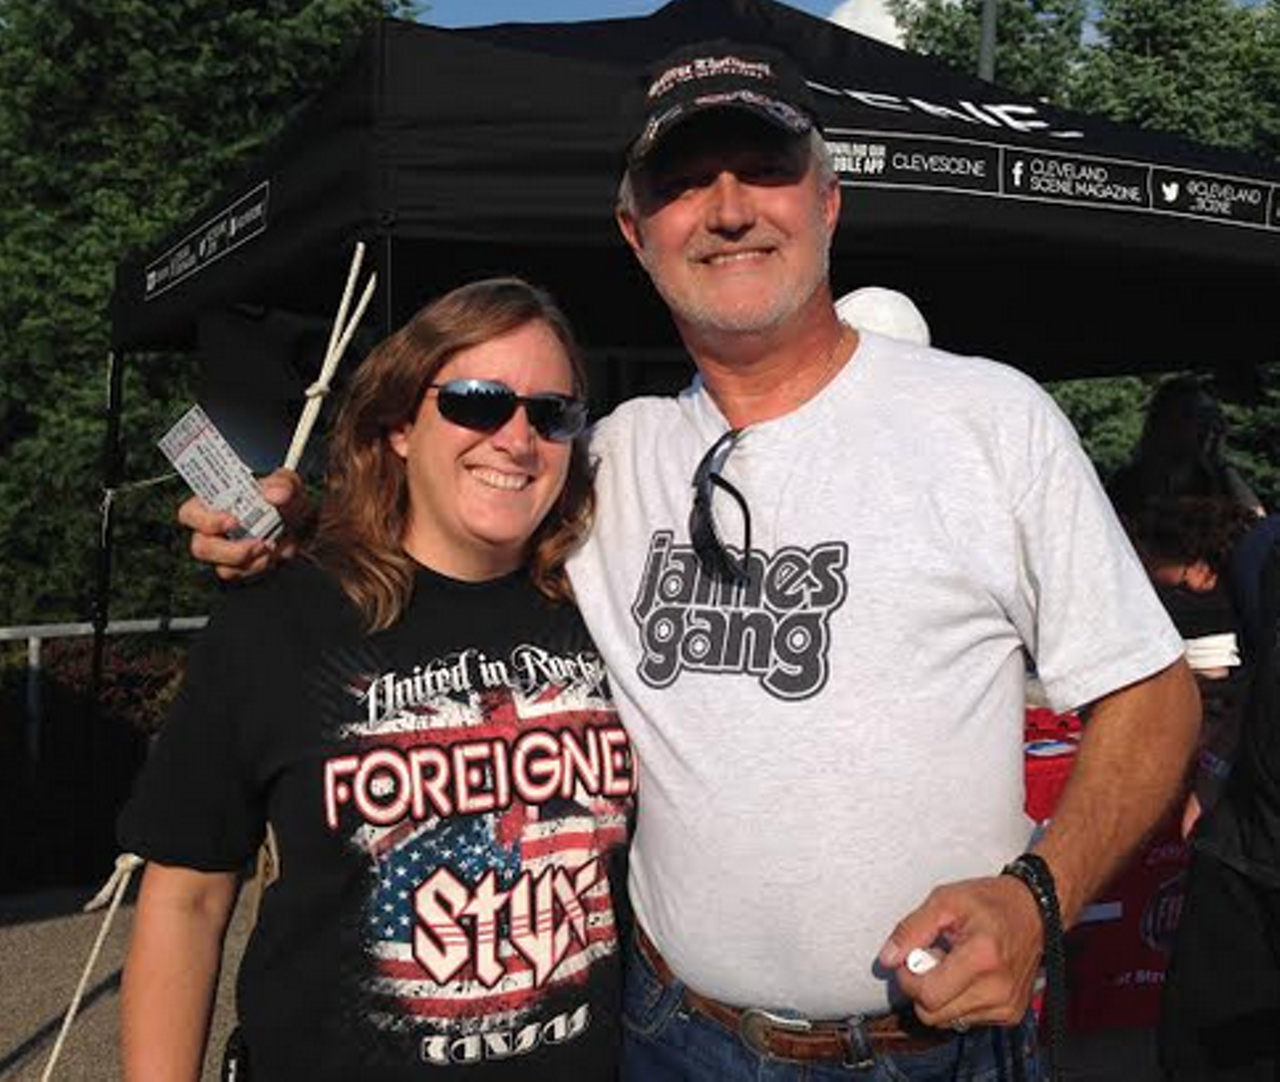 15 Photos of the Scene Events Team Driven by Fiat of Strongsville at Lynyrd Skynyrd